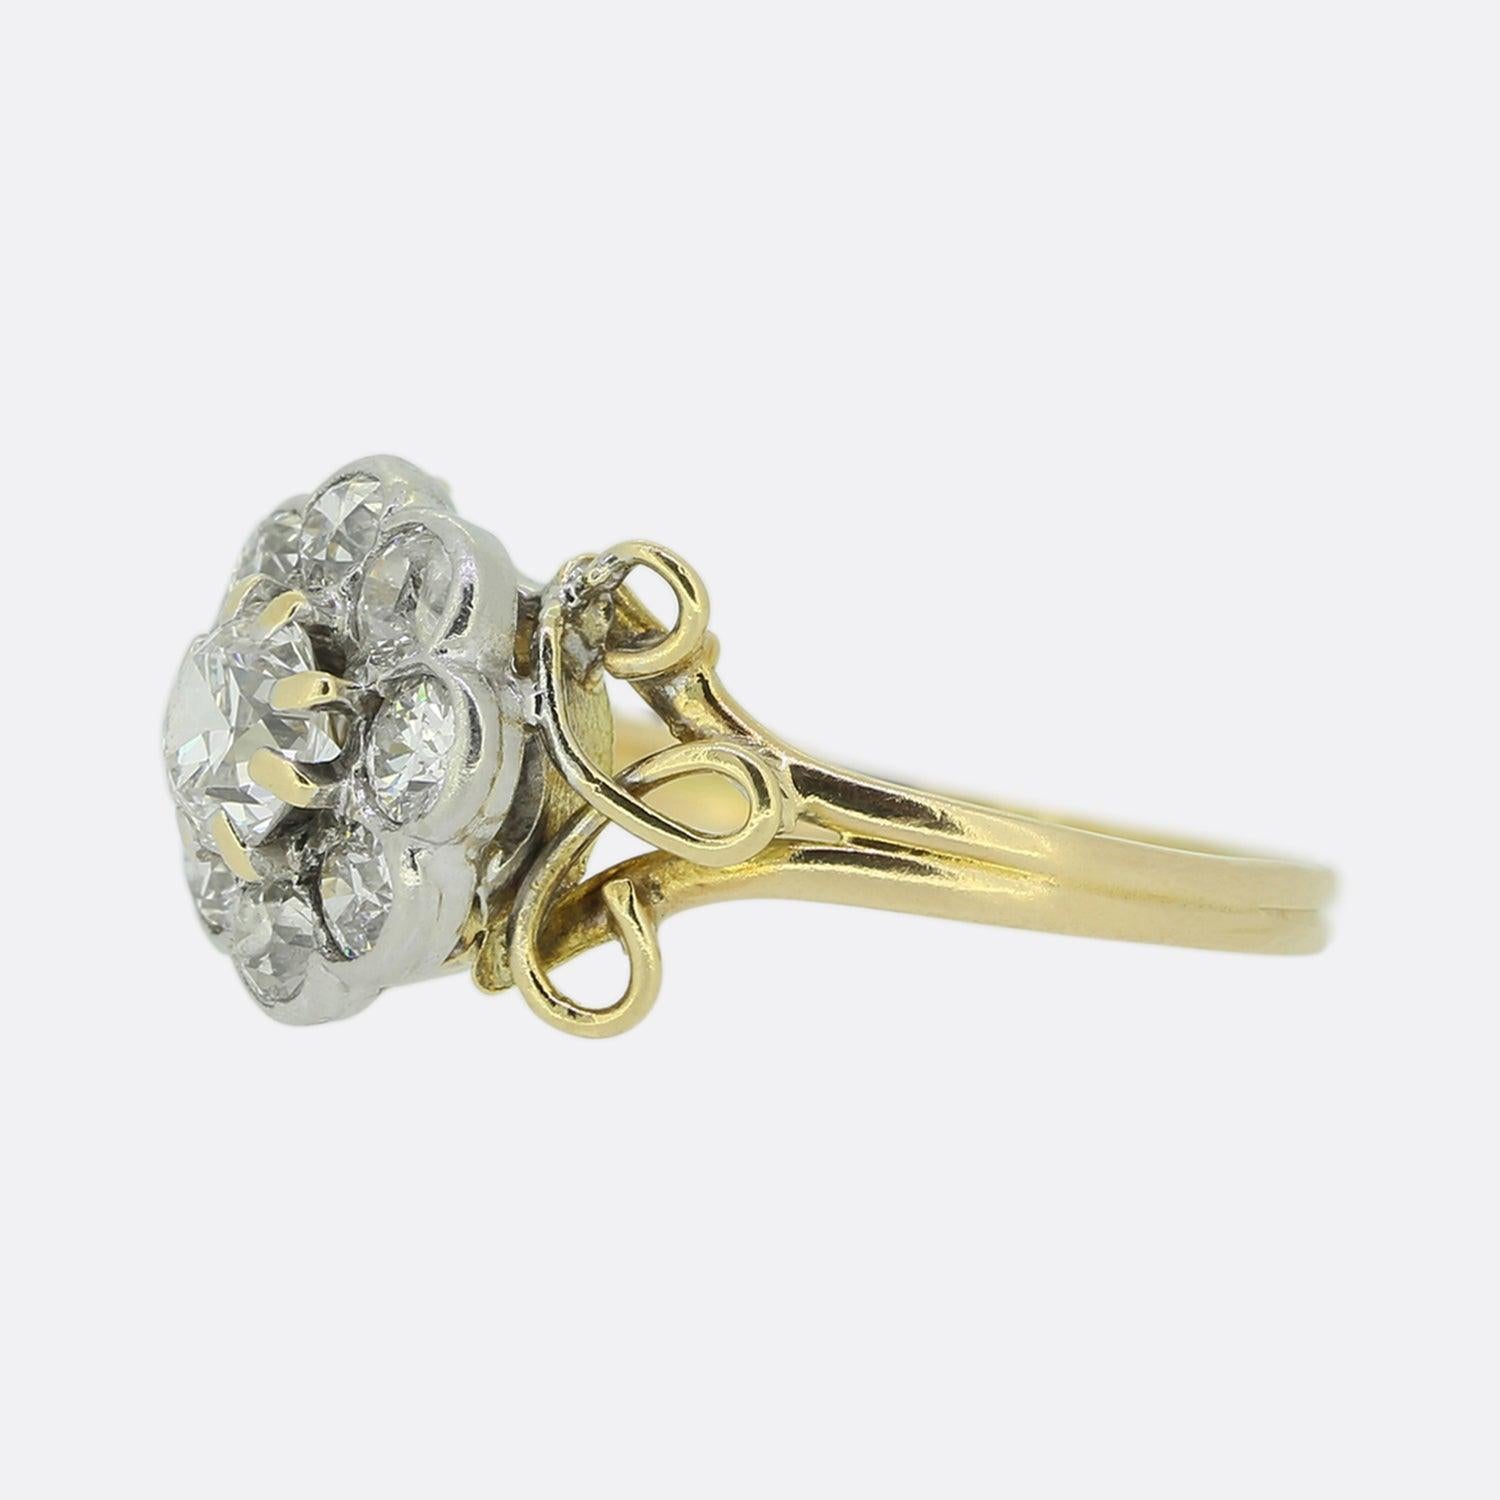 Here we a wonderful Victorian diamond cluster ring. The ring features a central old cut diamond which is surrounded by a halo of eight old cut diamonds in a cluster formation and crafted in 18ct yellow gold. 

Condition: Used (Very Good)
Weight: 2.0